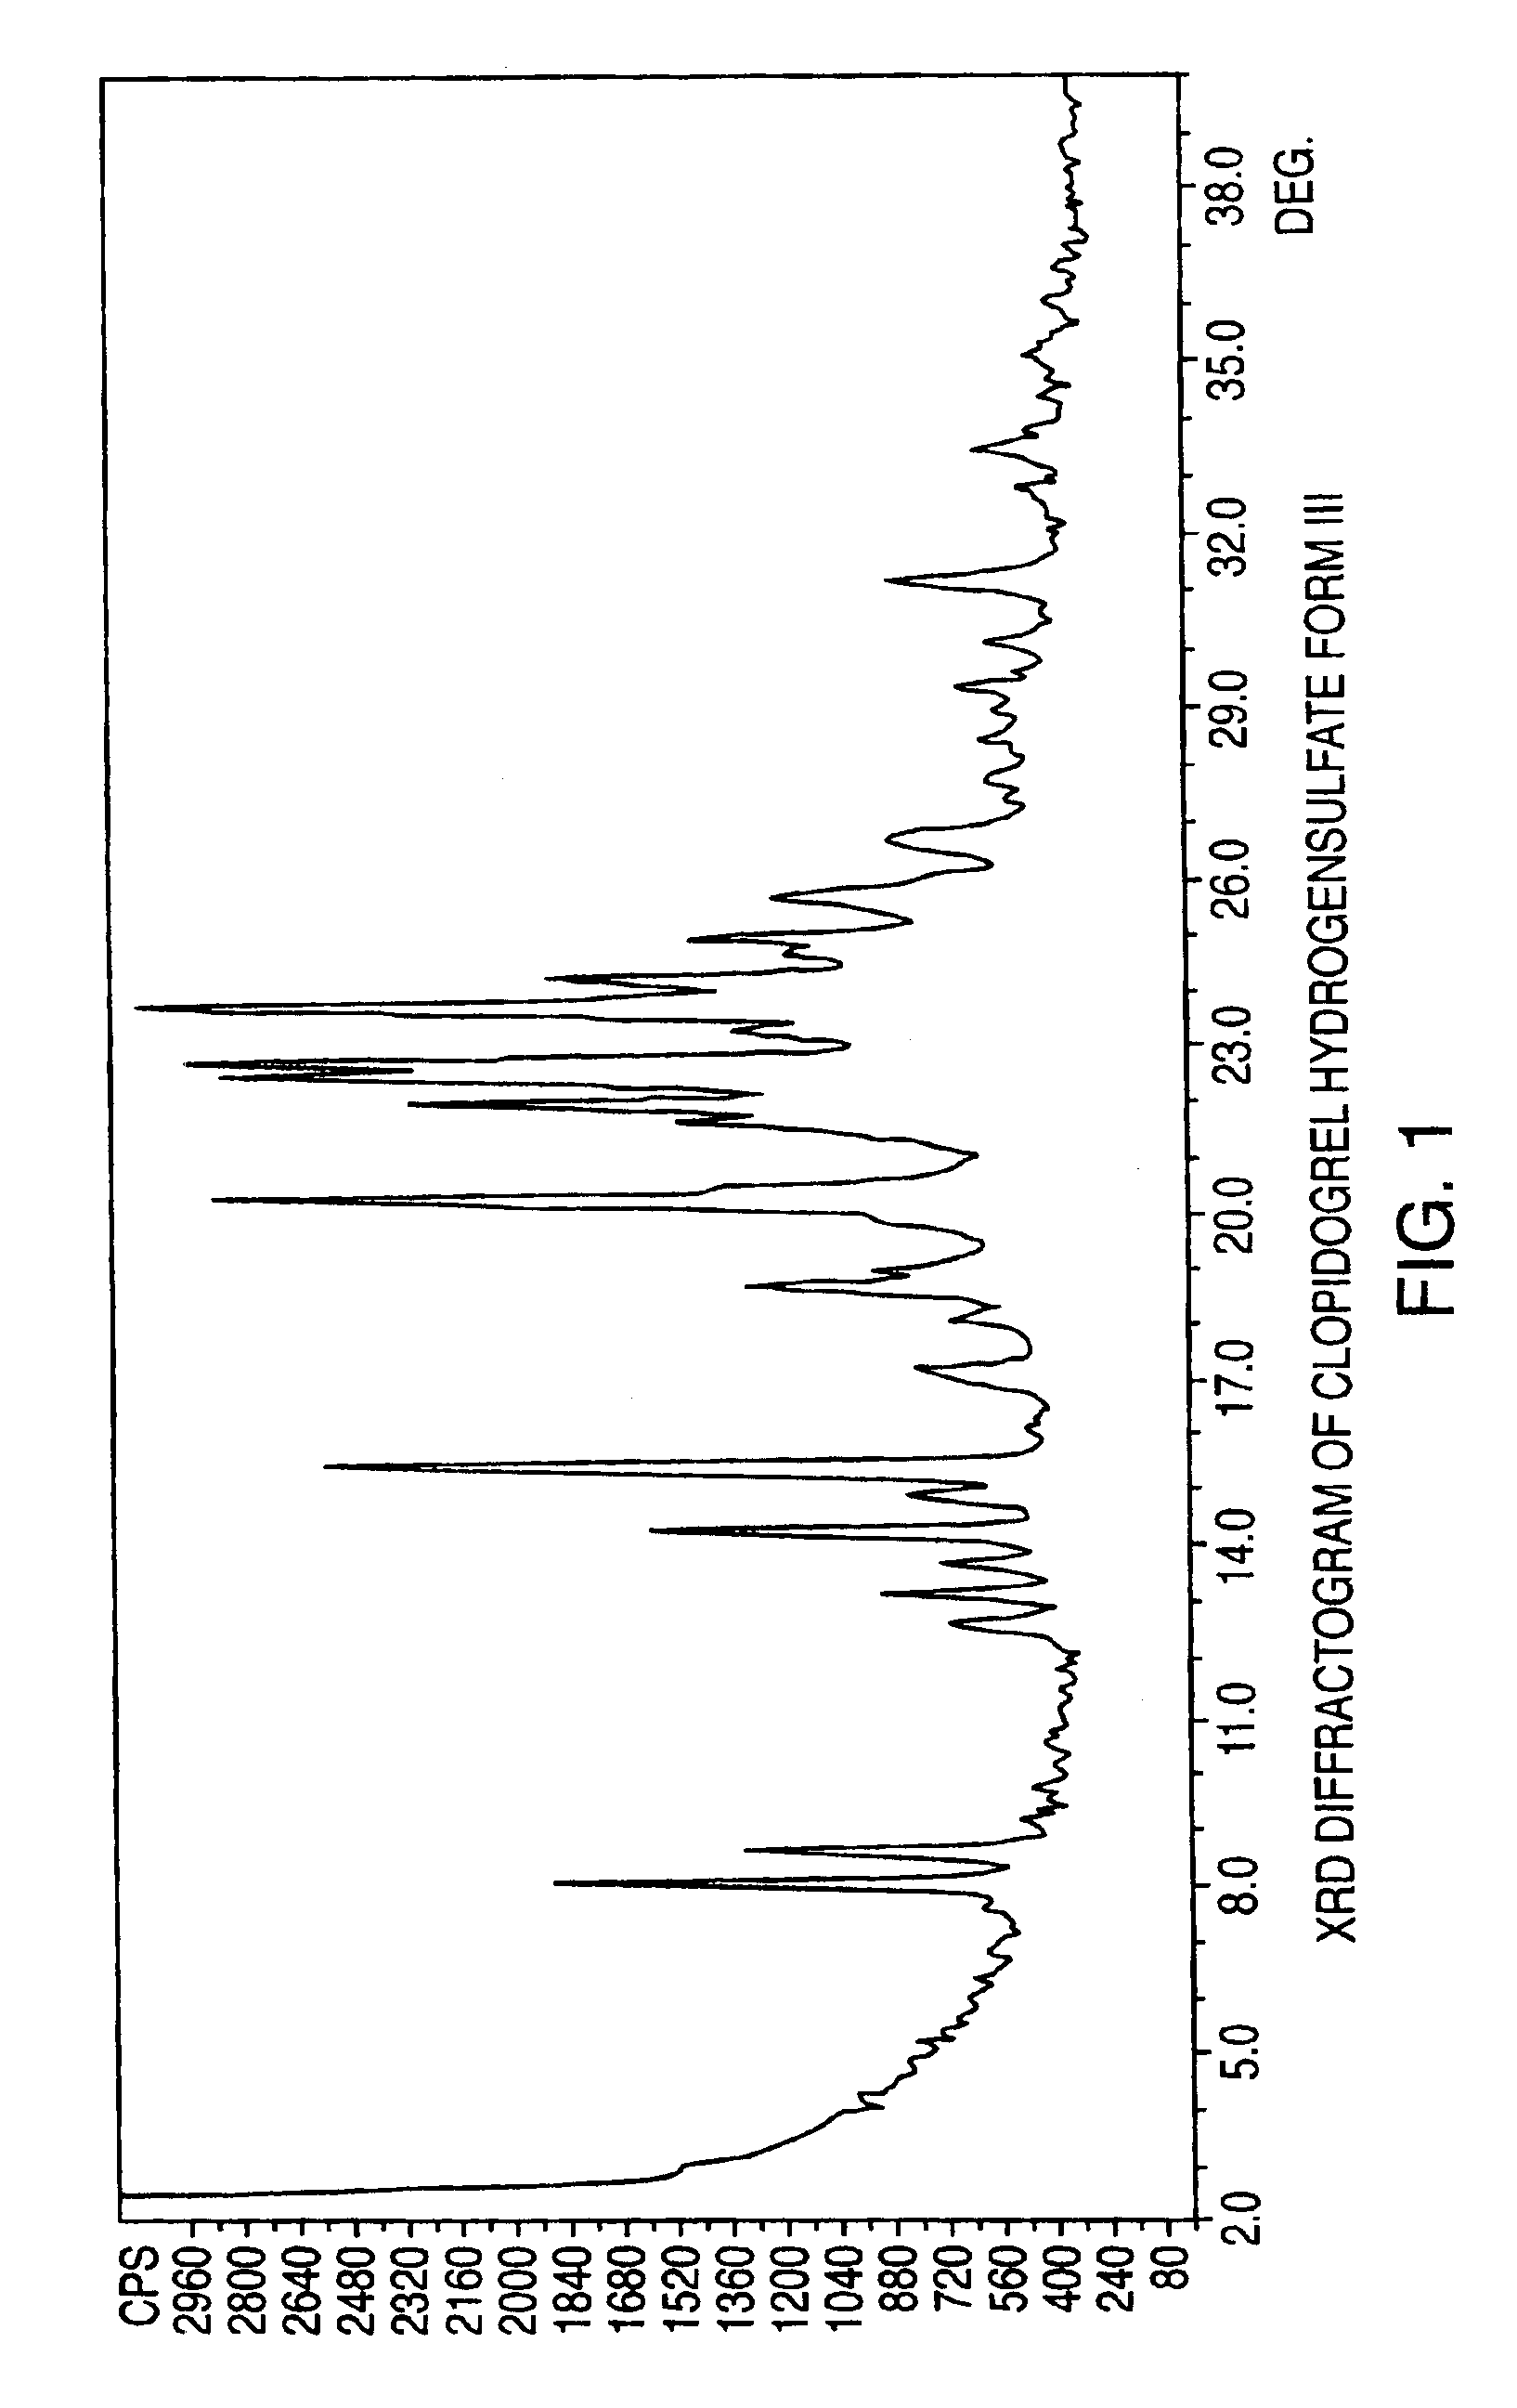 Polymorphs of clopidogrel hydrogensulfate